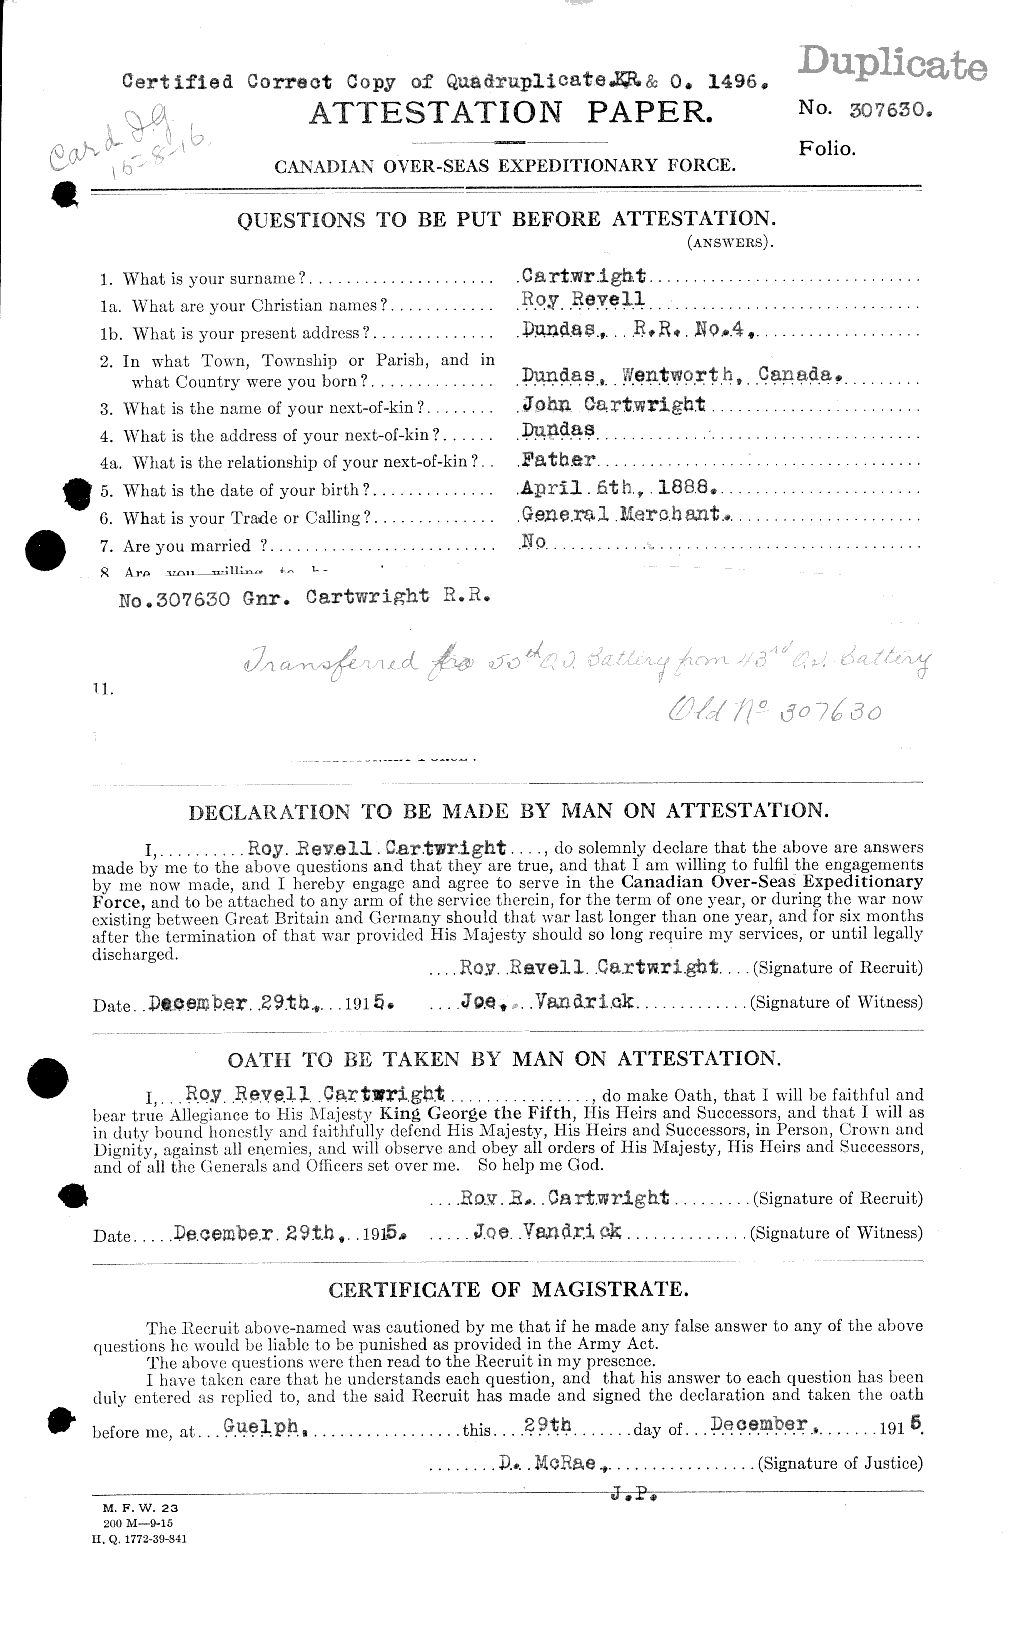 Personnel Records of the First World War - CEF 011618a